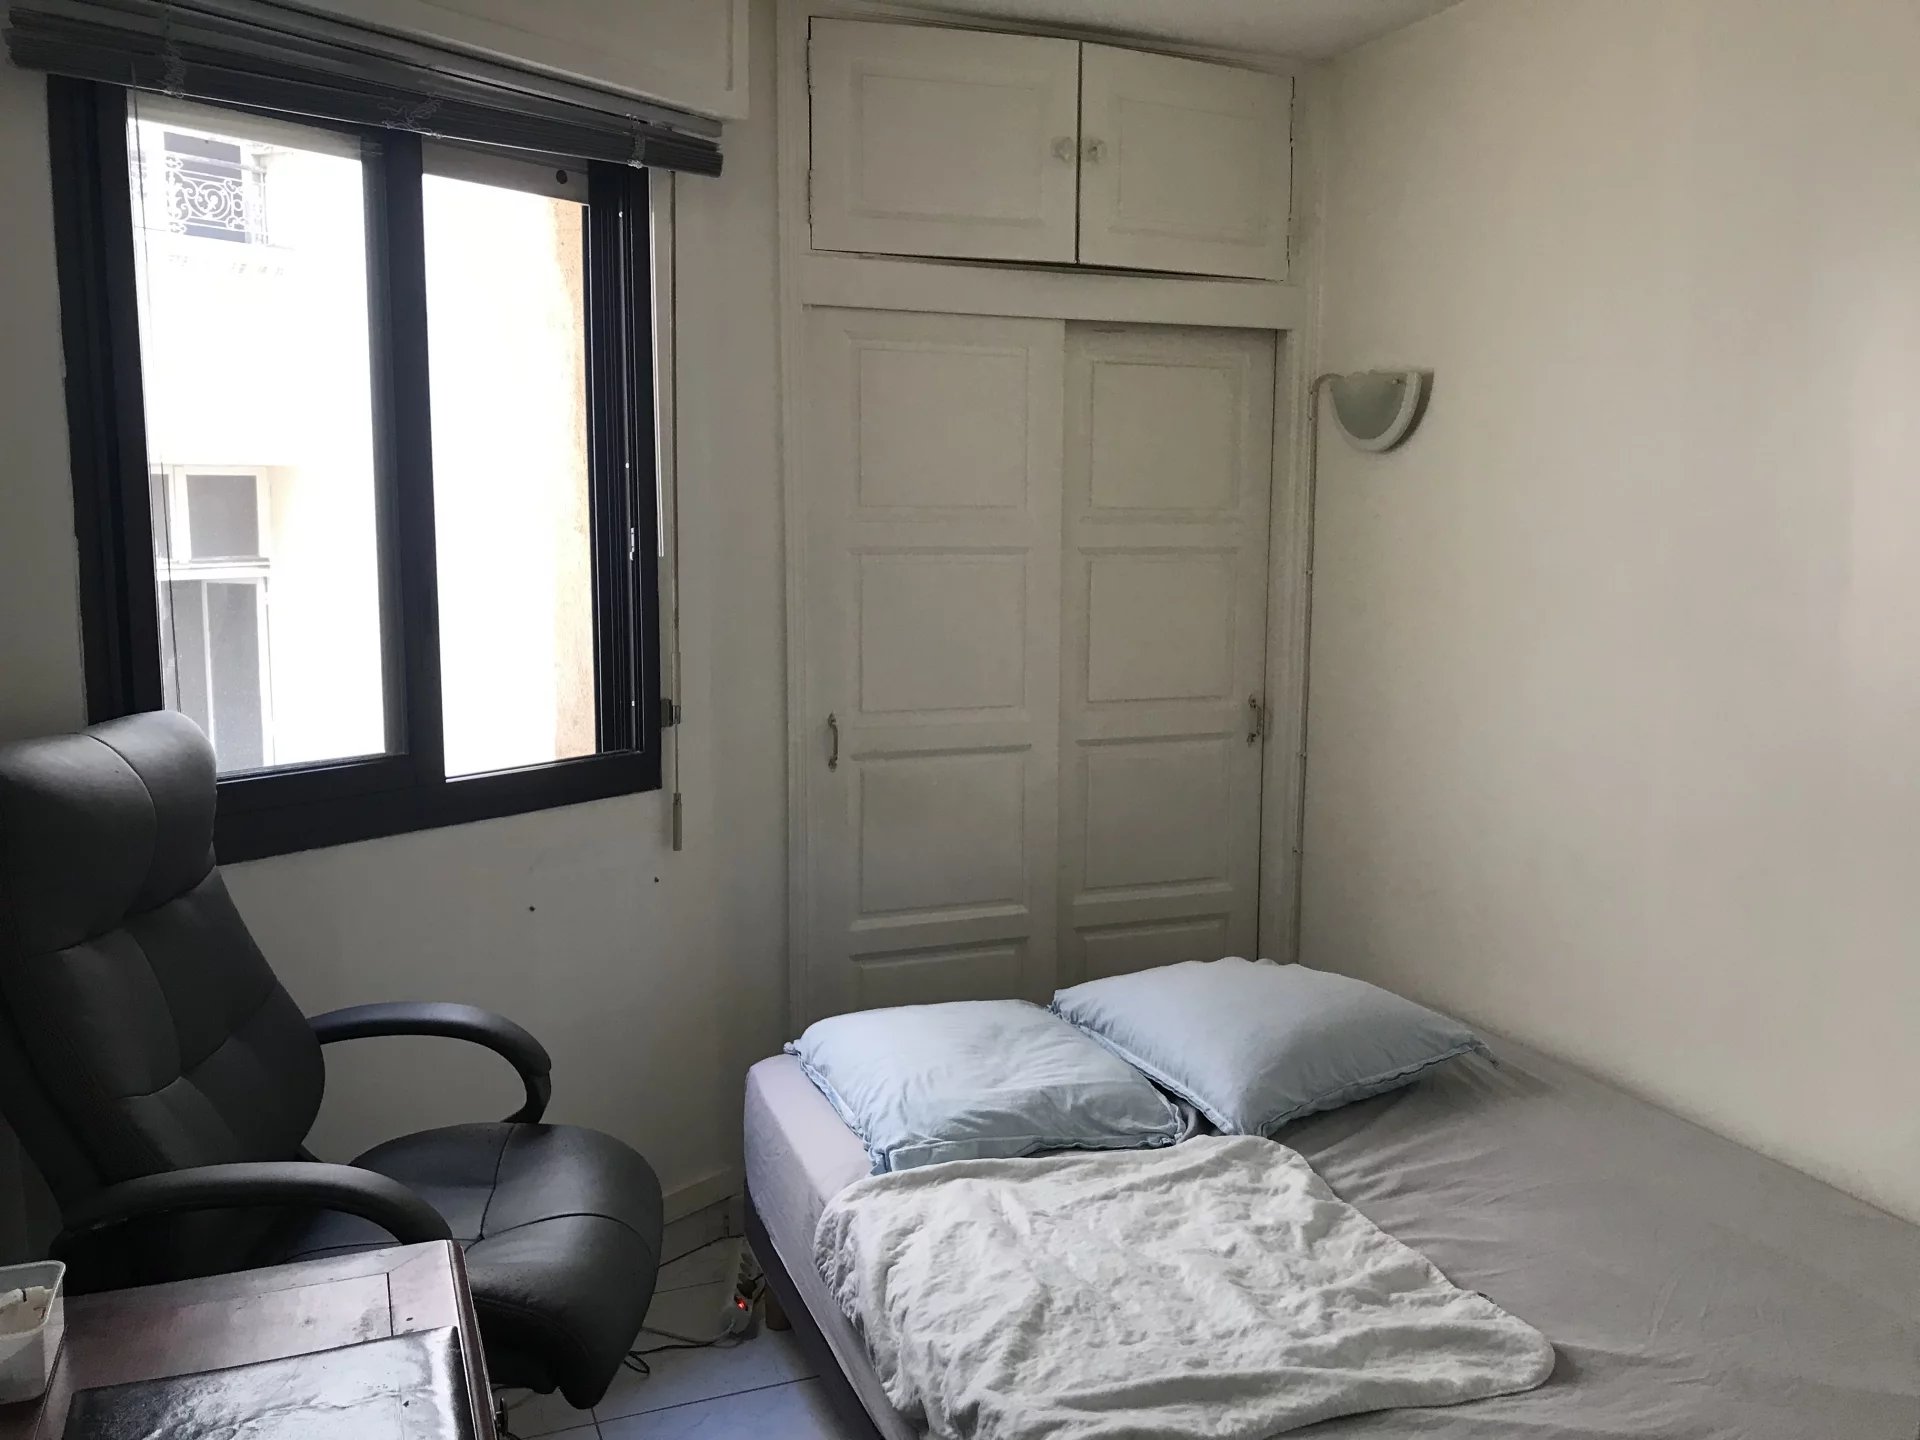 Antibes center flat with terrace,  OCCUPIED LIFE ANNUITY